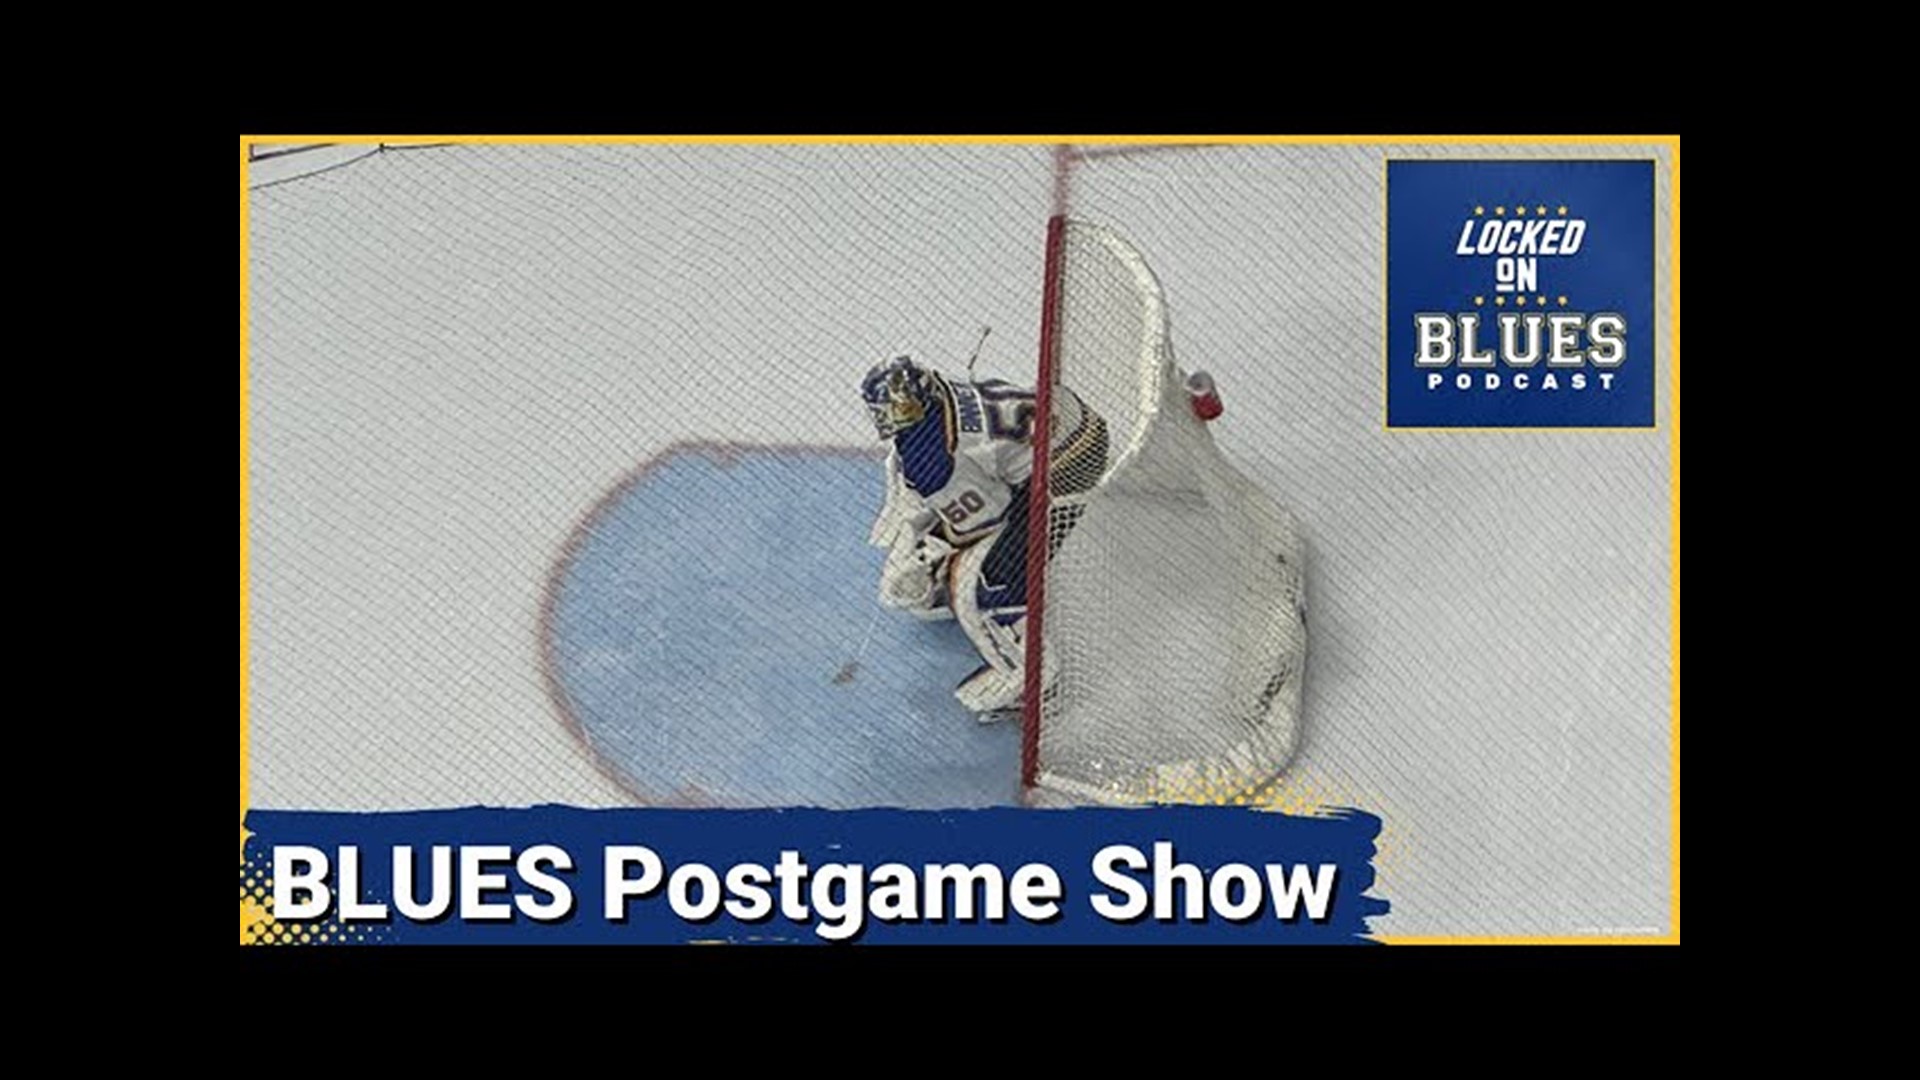 THE ST. LOUIS BLUES ARE NOT DONE YET